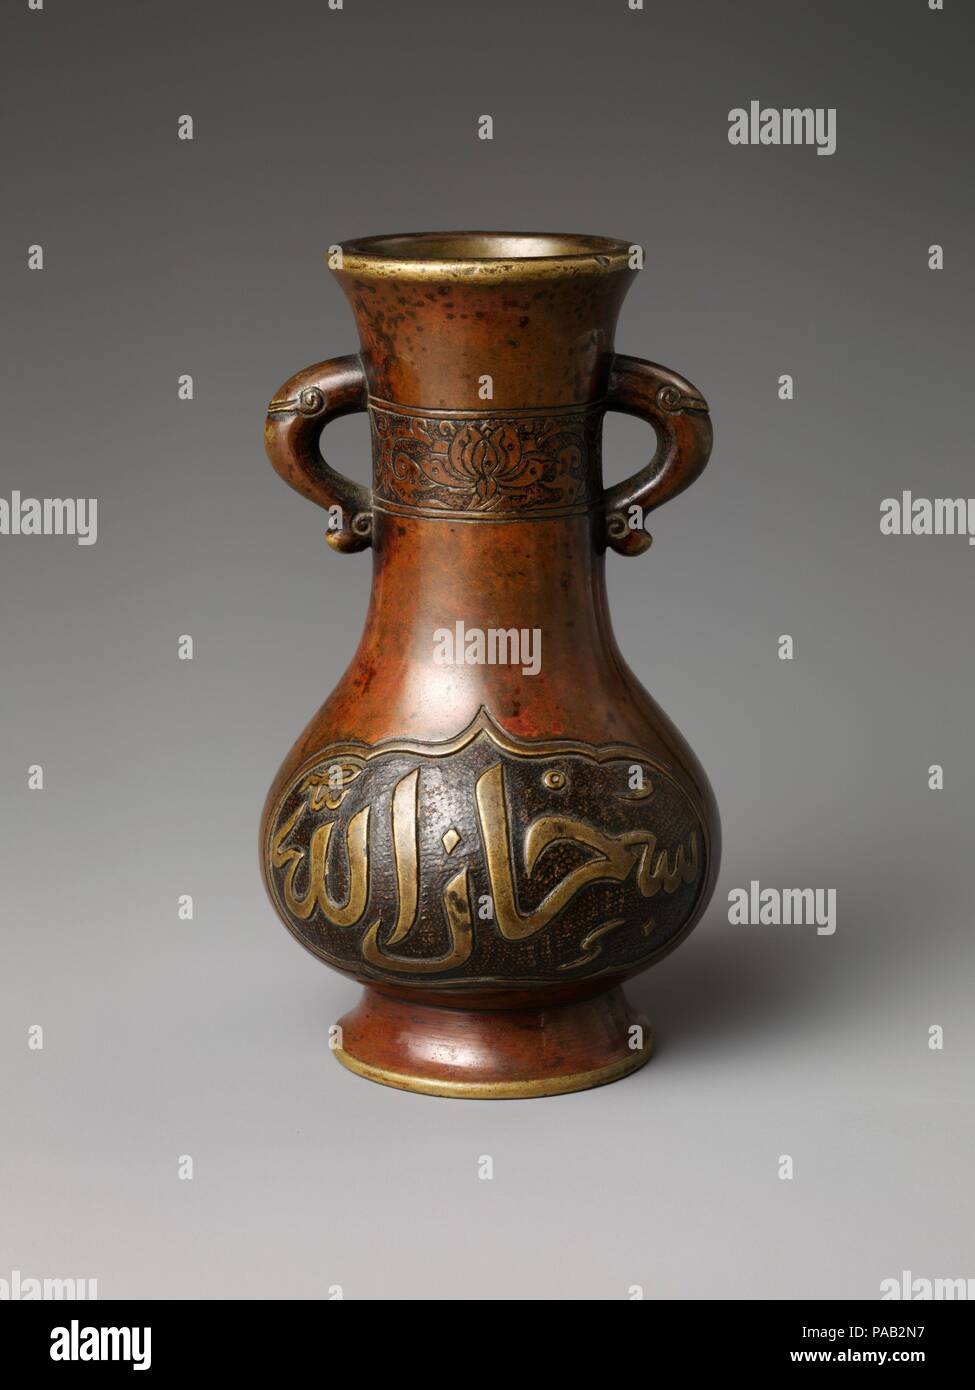 Vase. Culture: China. Dimensions: H. 5 3/4 in. (14.6 cm). Date: late  17th-early 18th century. Made for the Muslim community, this vase has two  Arabic inscriptions, which read, "Glory to Allah" and "